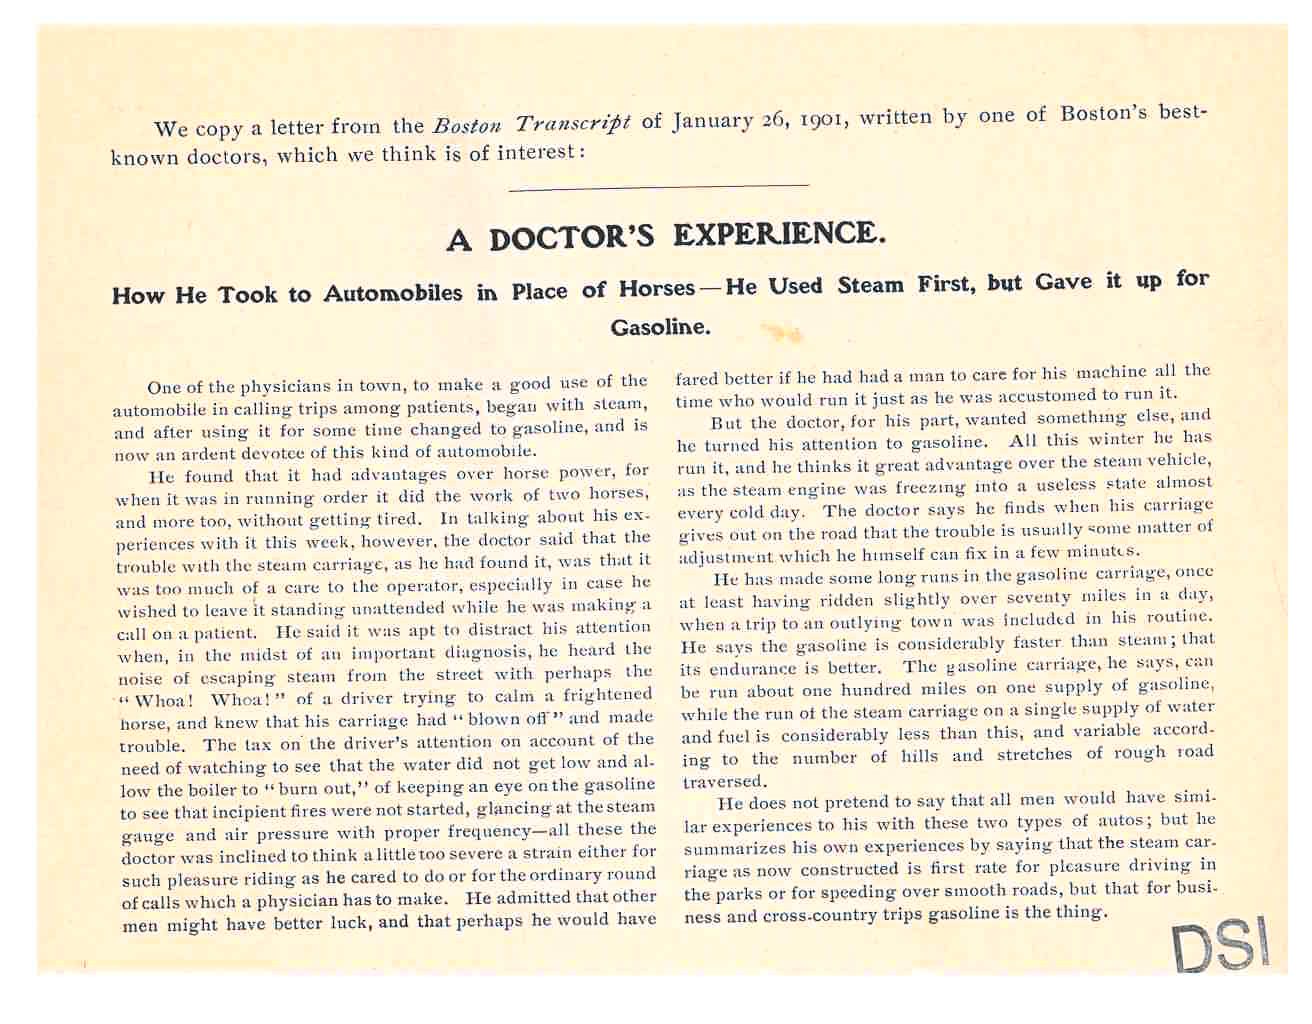 letter describing a doctor's experience from the Boston Transcript dated January 26, 1901